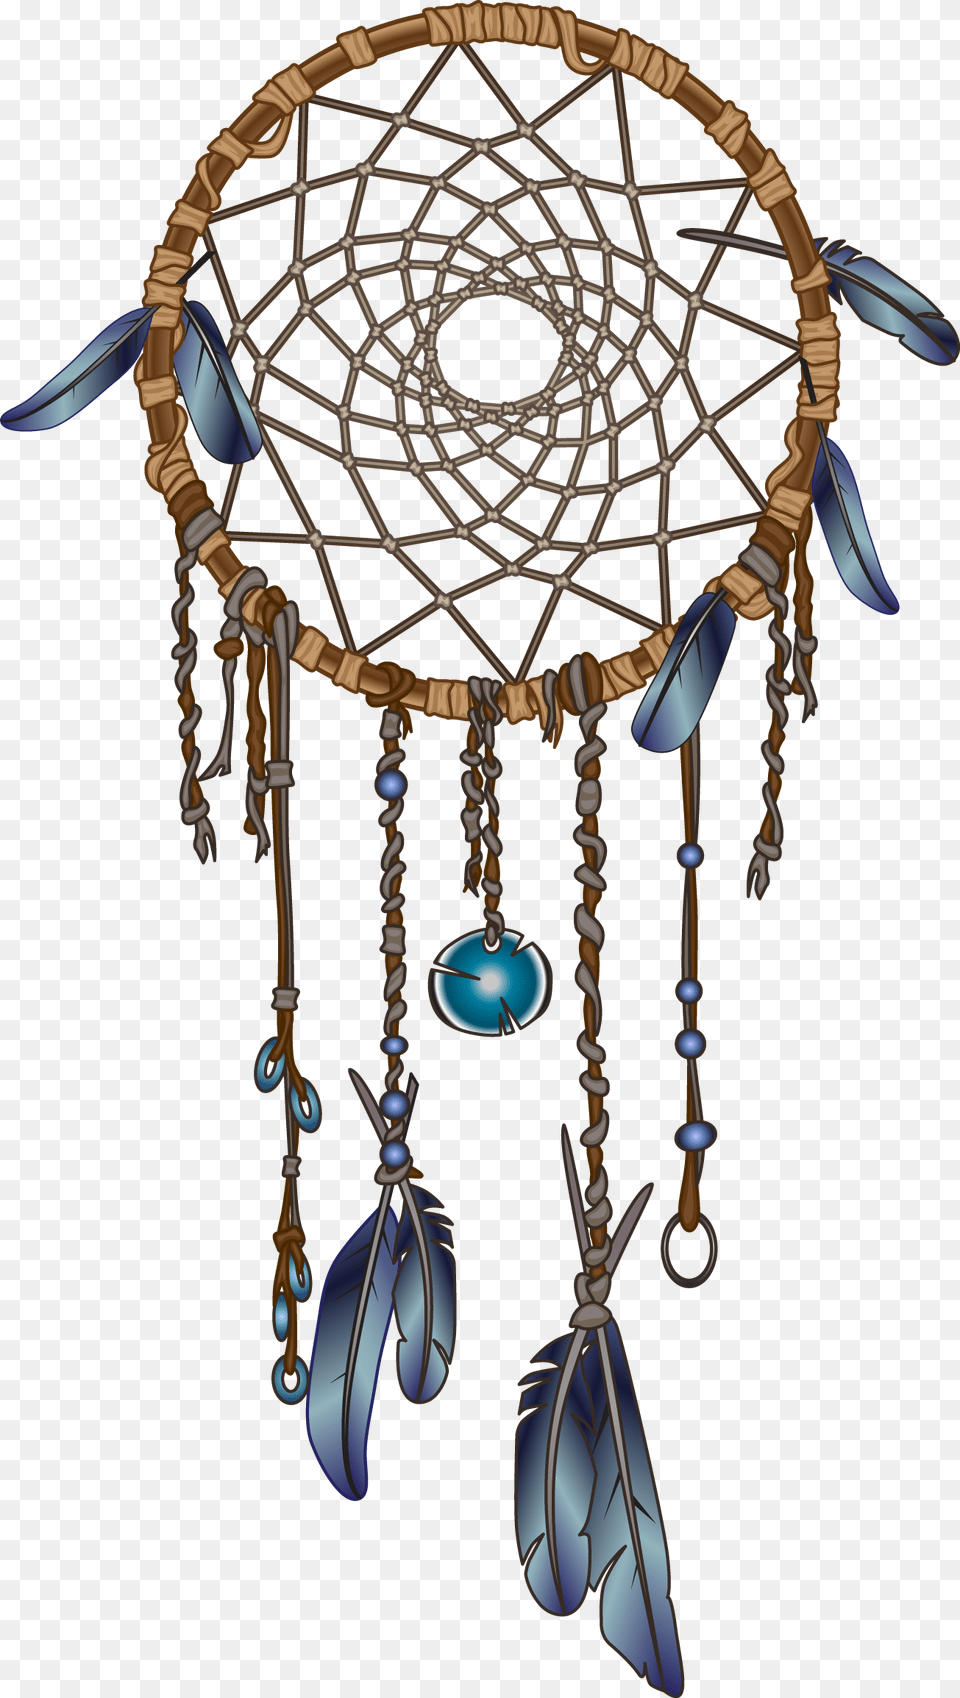 Earring Drawing Dream Catcher For Dream Catcher Transparent Background, Accessories, Jewelry, Necklace, Chandelier Free Png Download